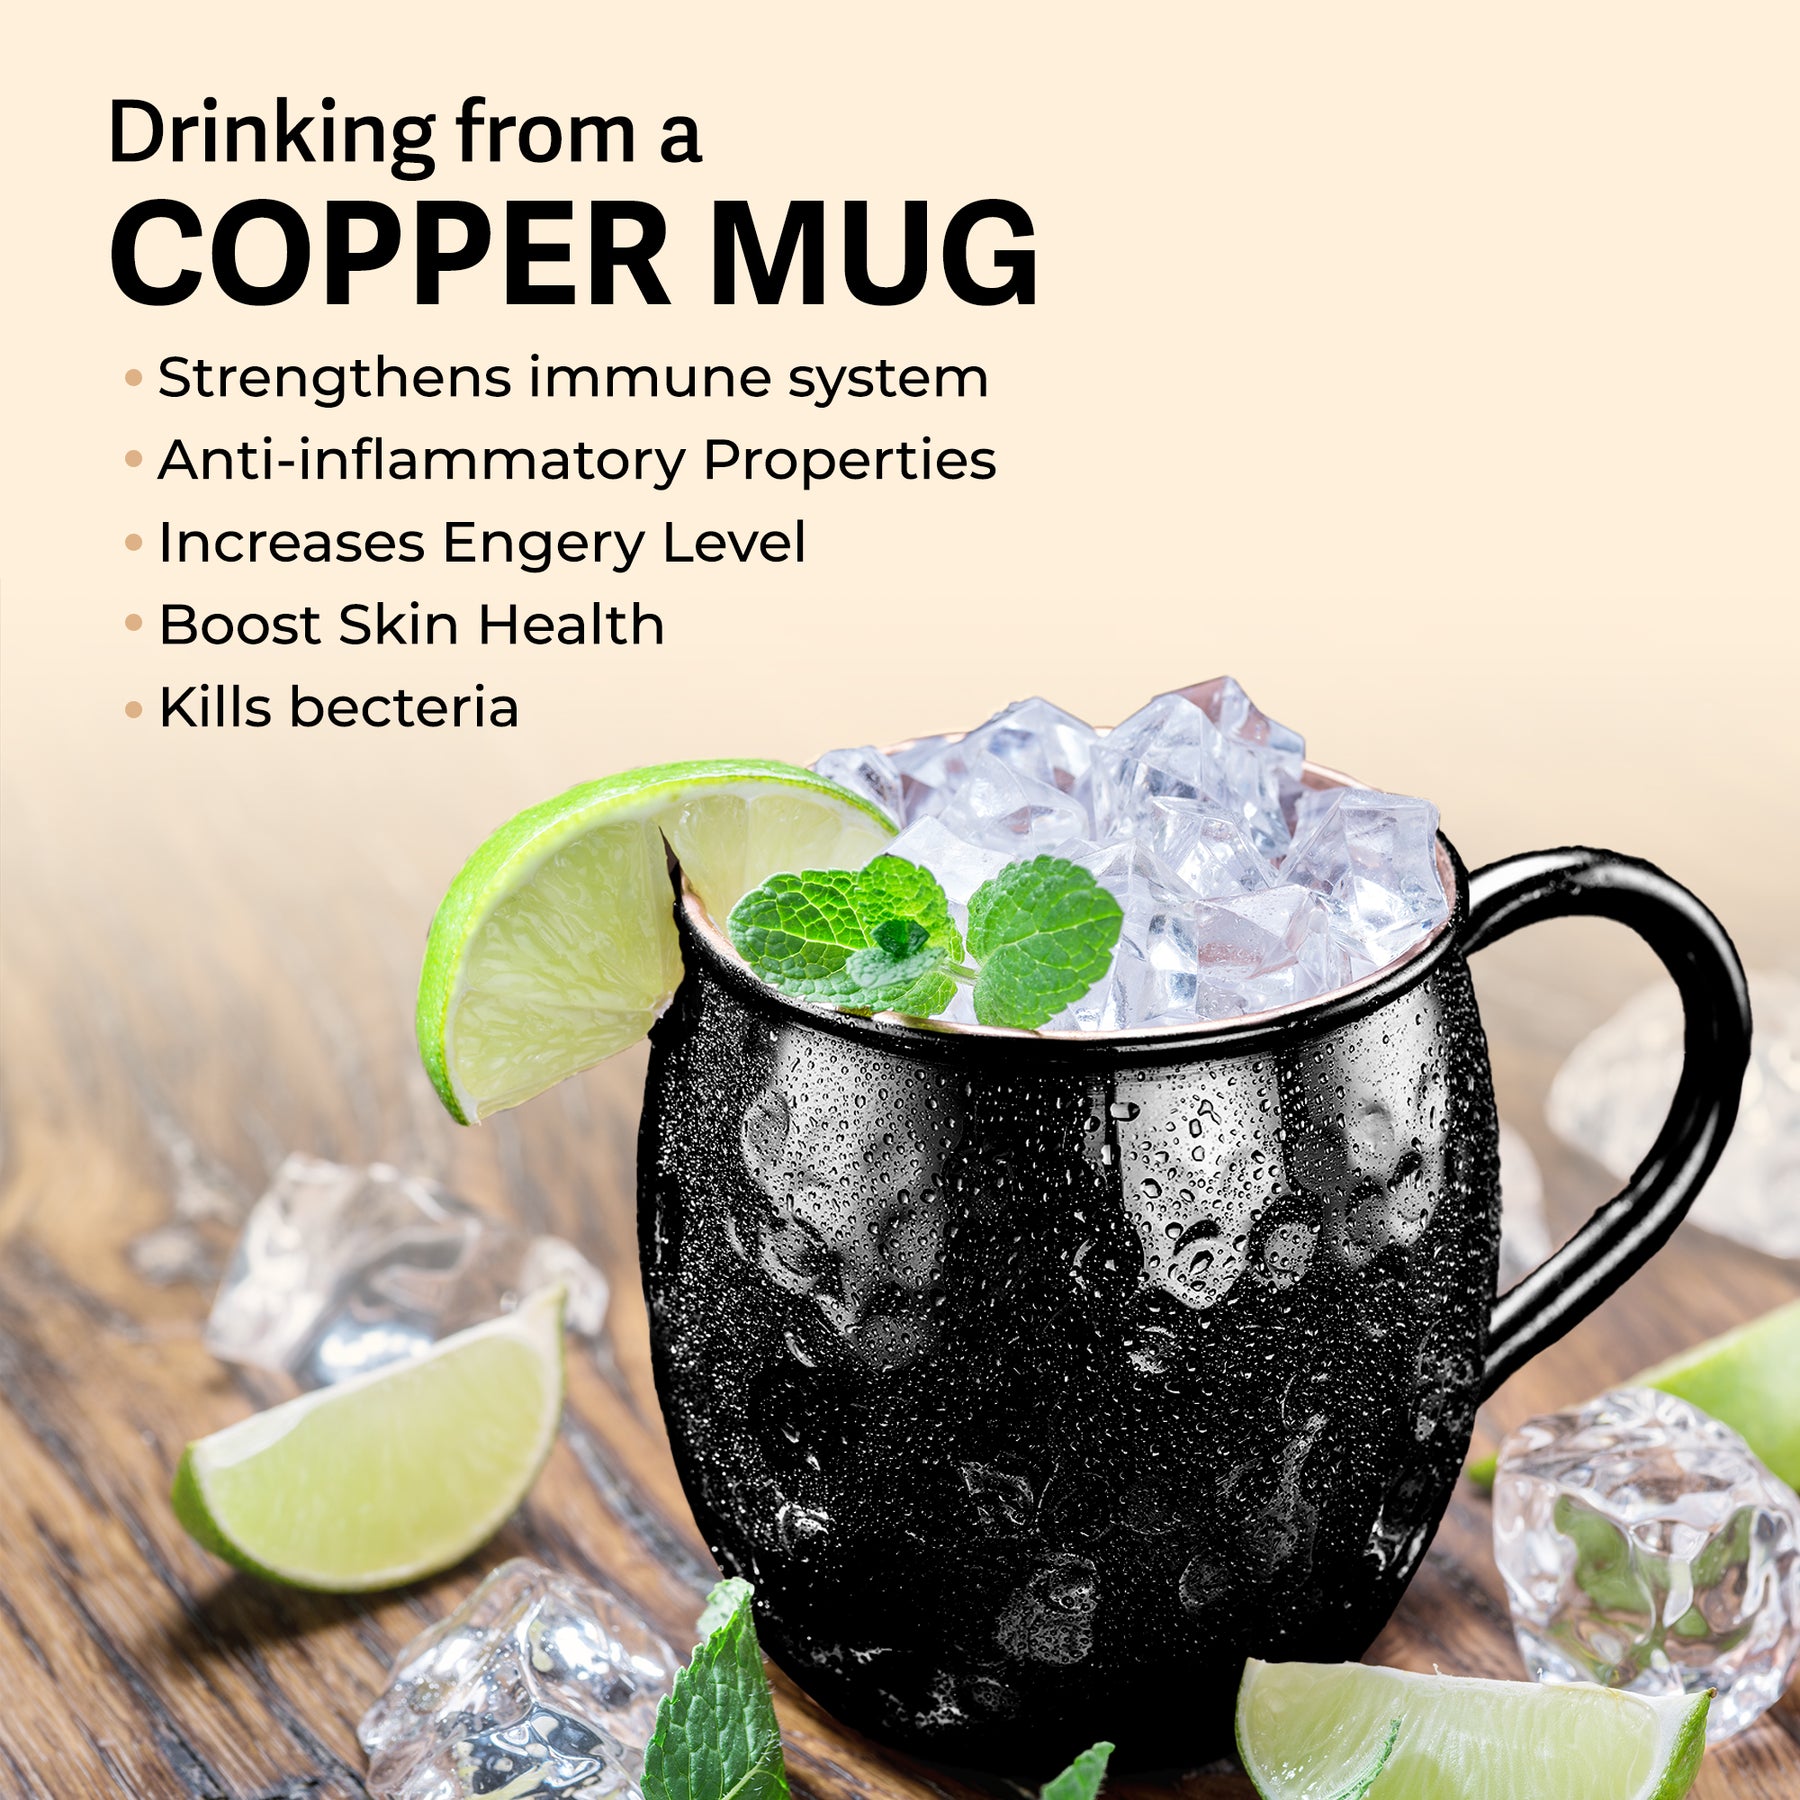 The Original Moscow Mule Mug with Gift Box